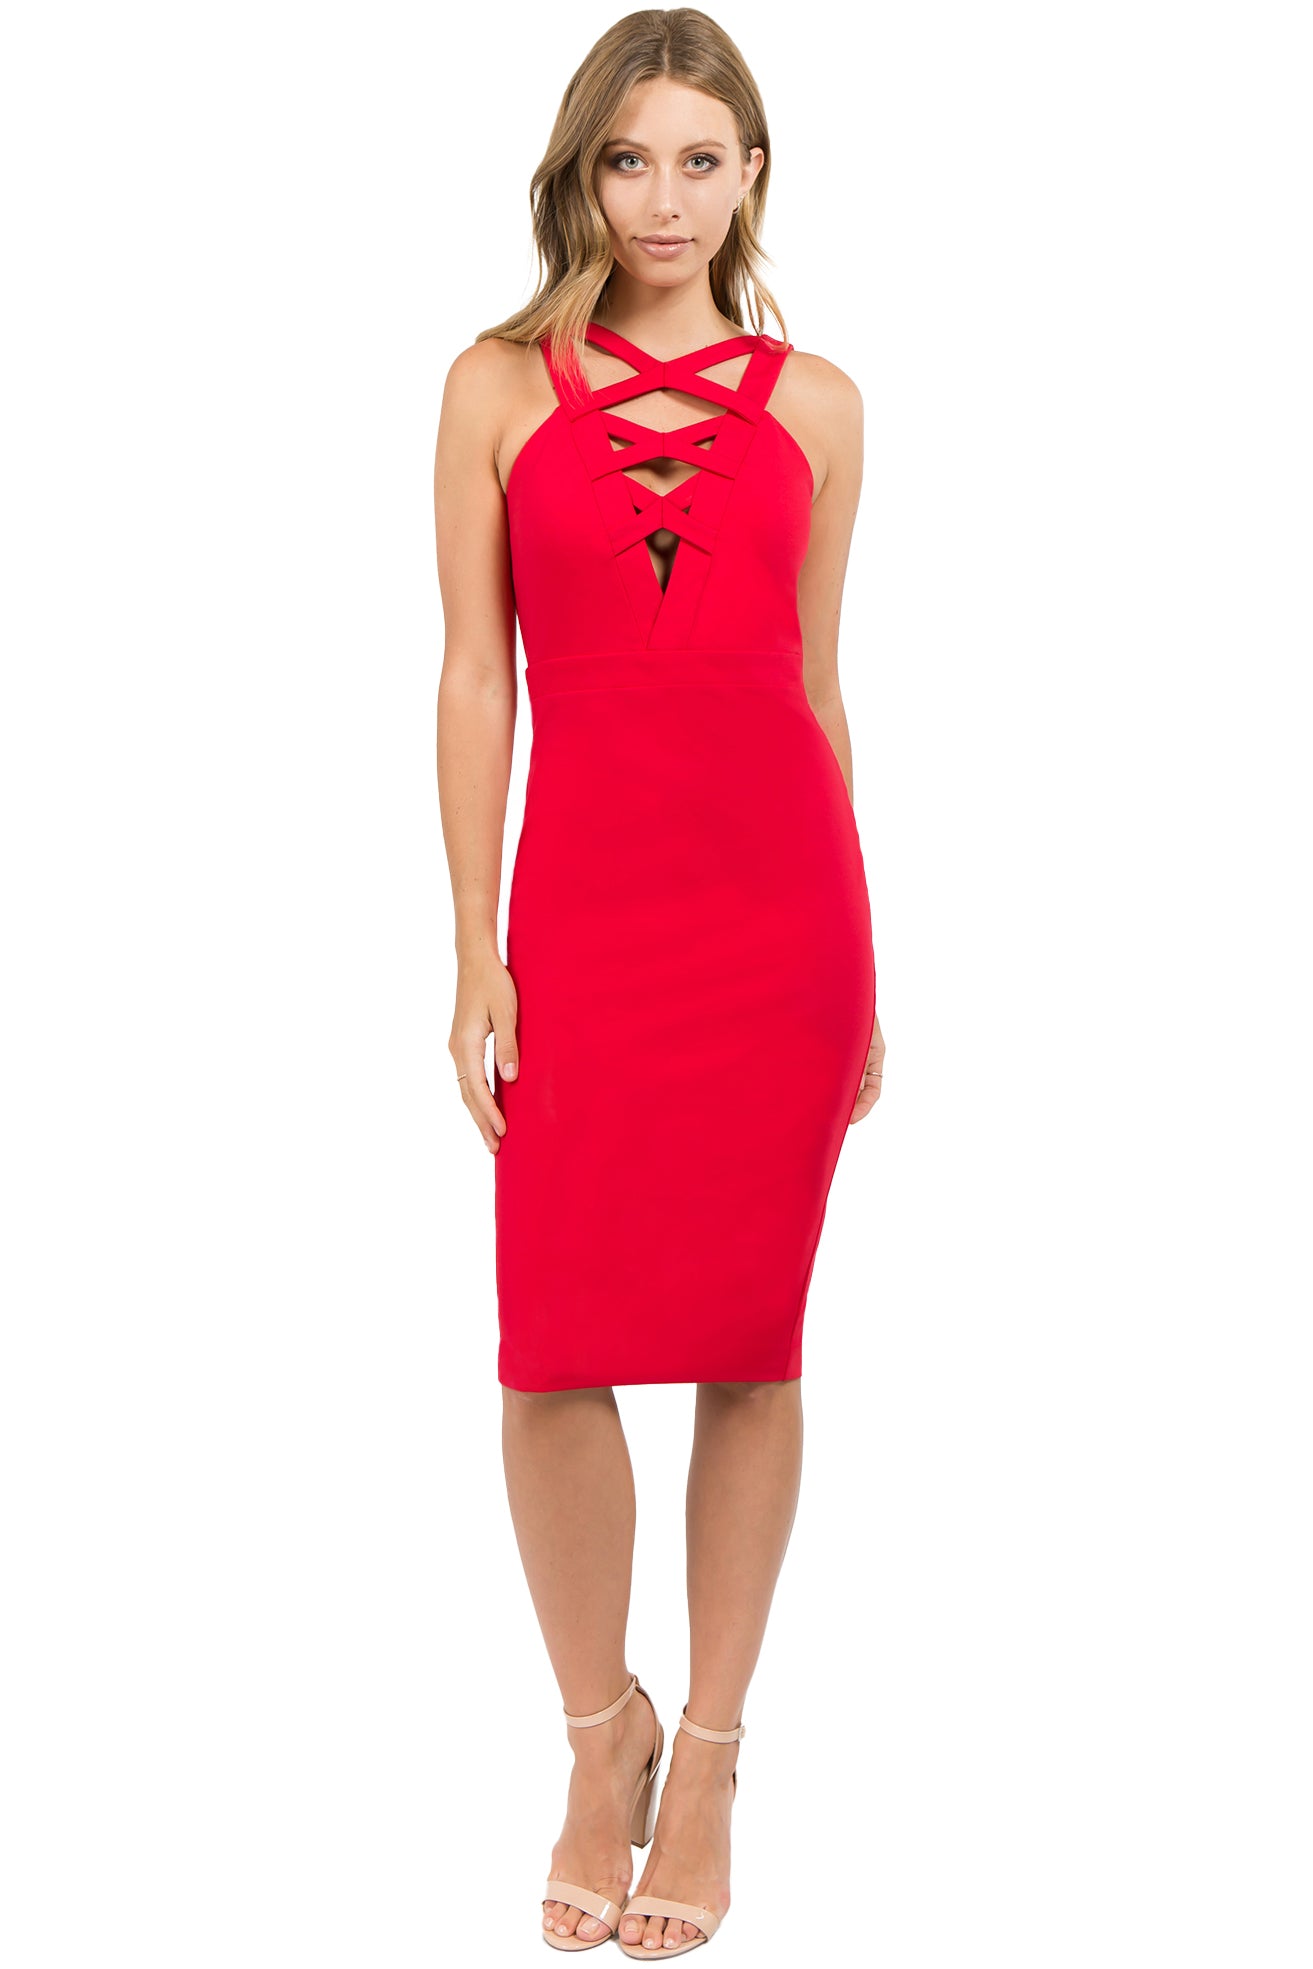 Model wearing body con red stretch midi Ponte dress, with low v-neck & criss cross bands in front top.